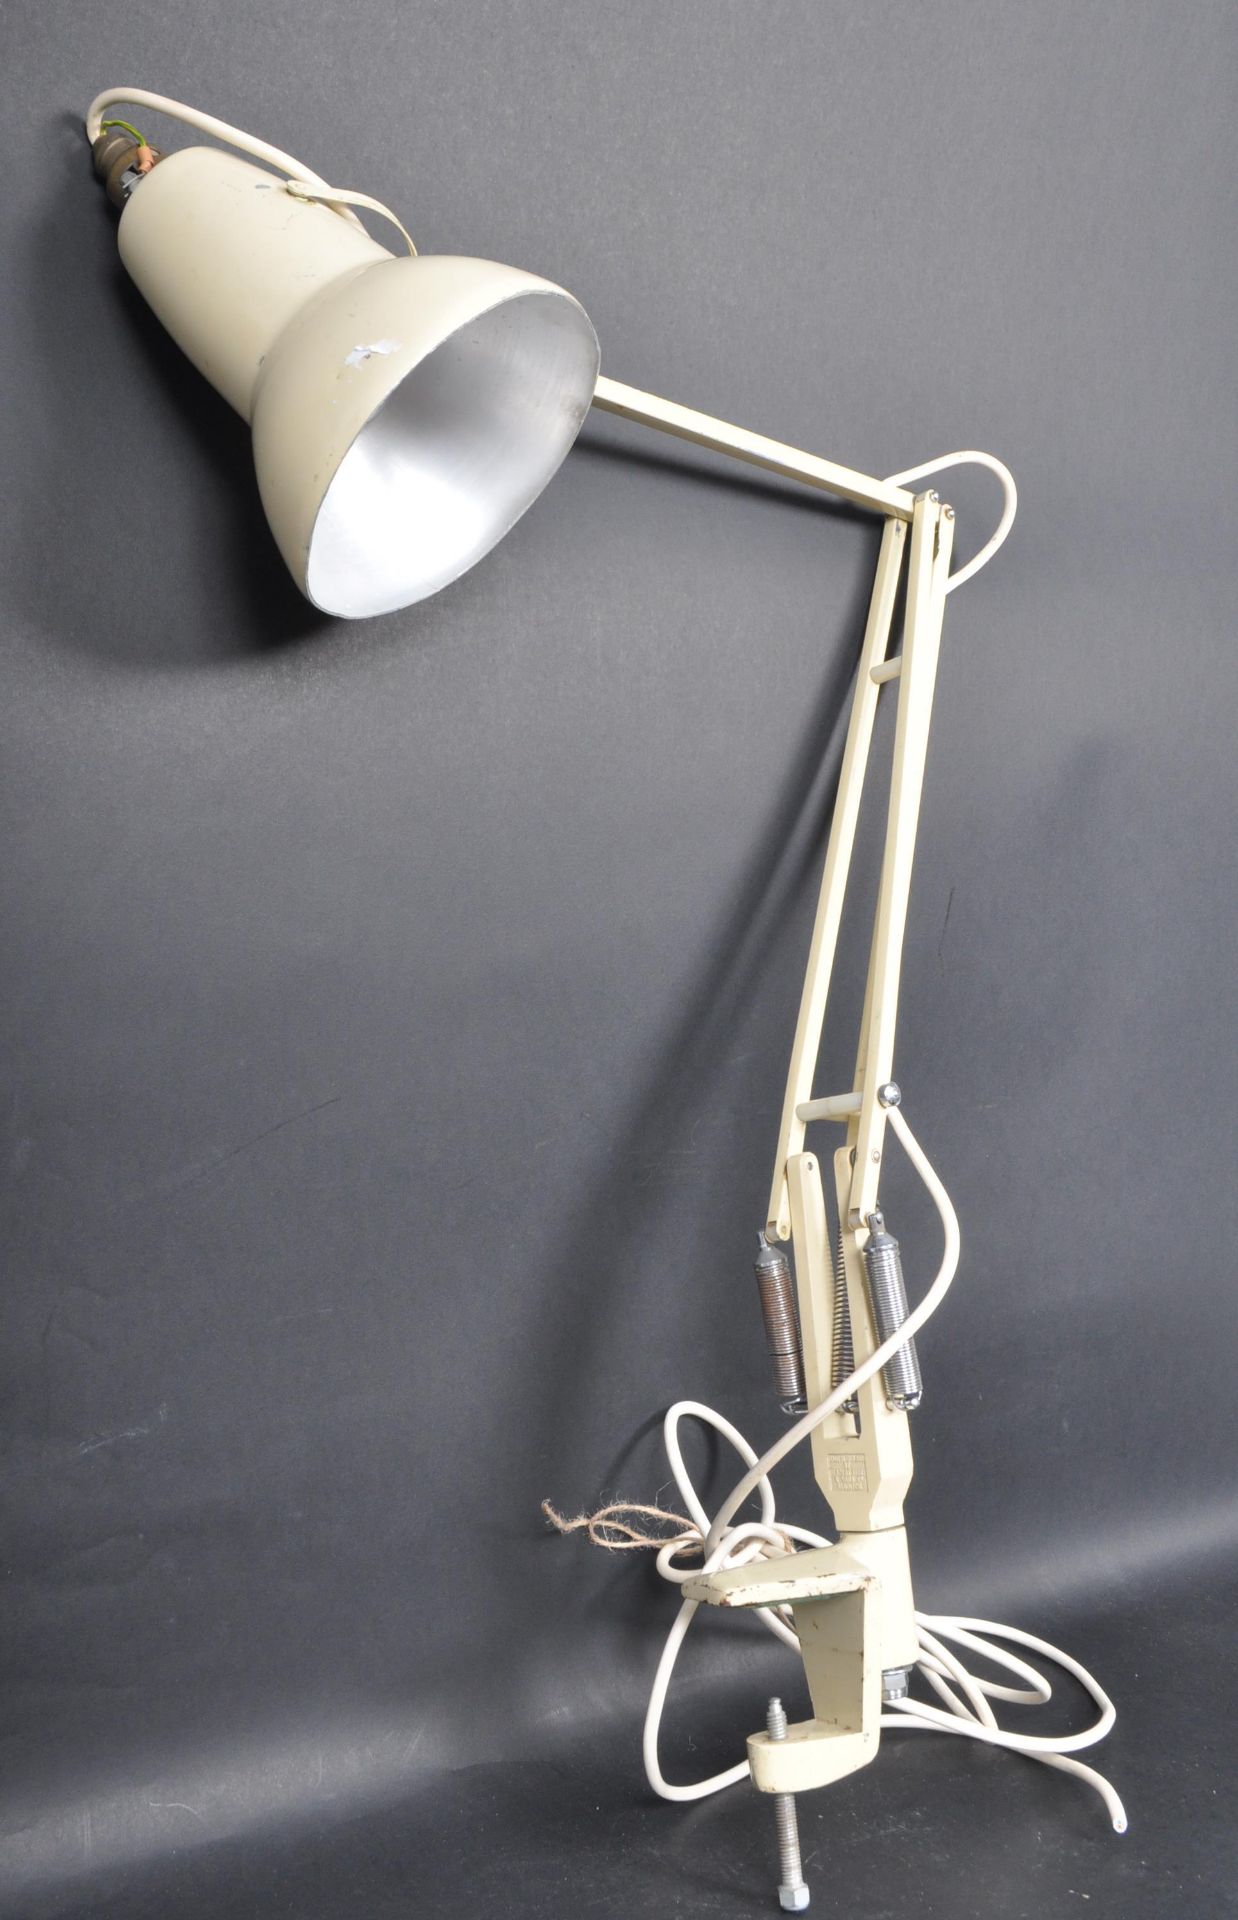 MID 20TH CENTURY HERBERT TERRY ANGLEPOISE LAMP - Image 2 of 5